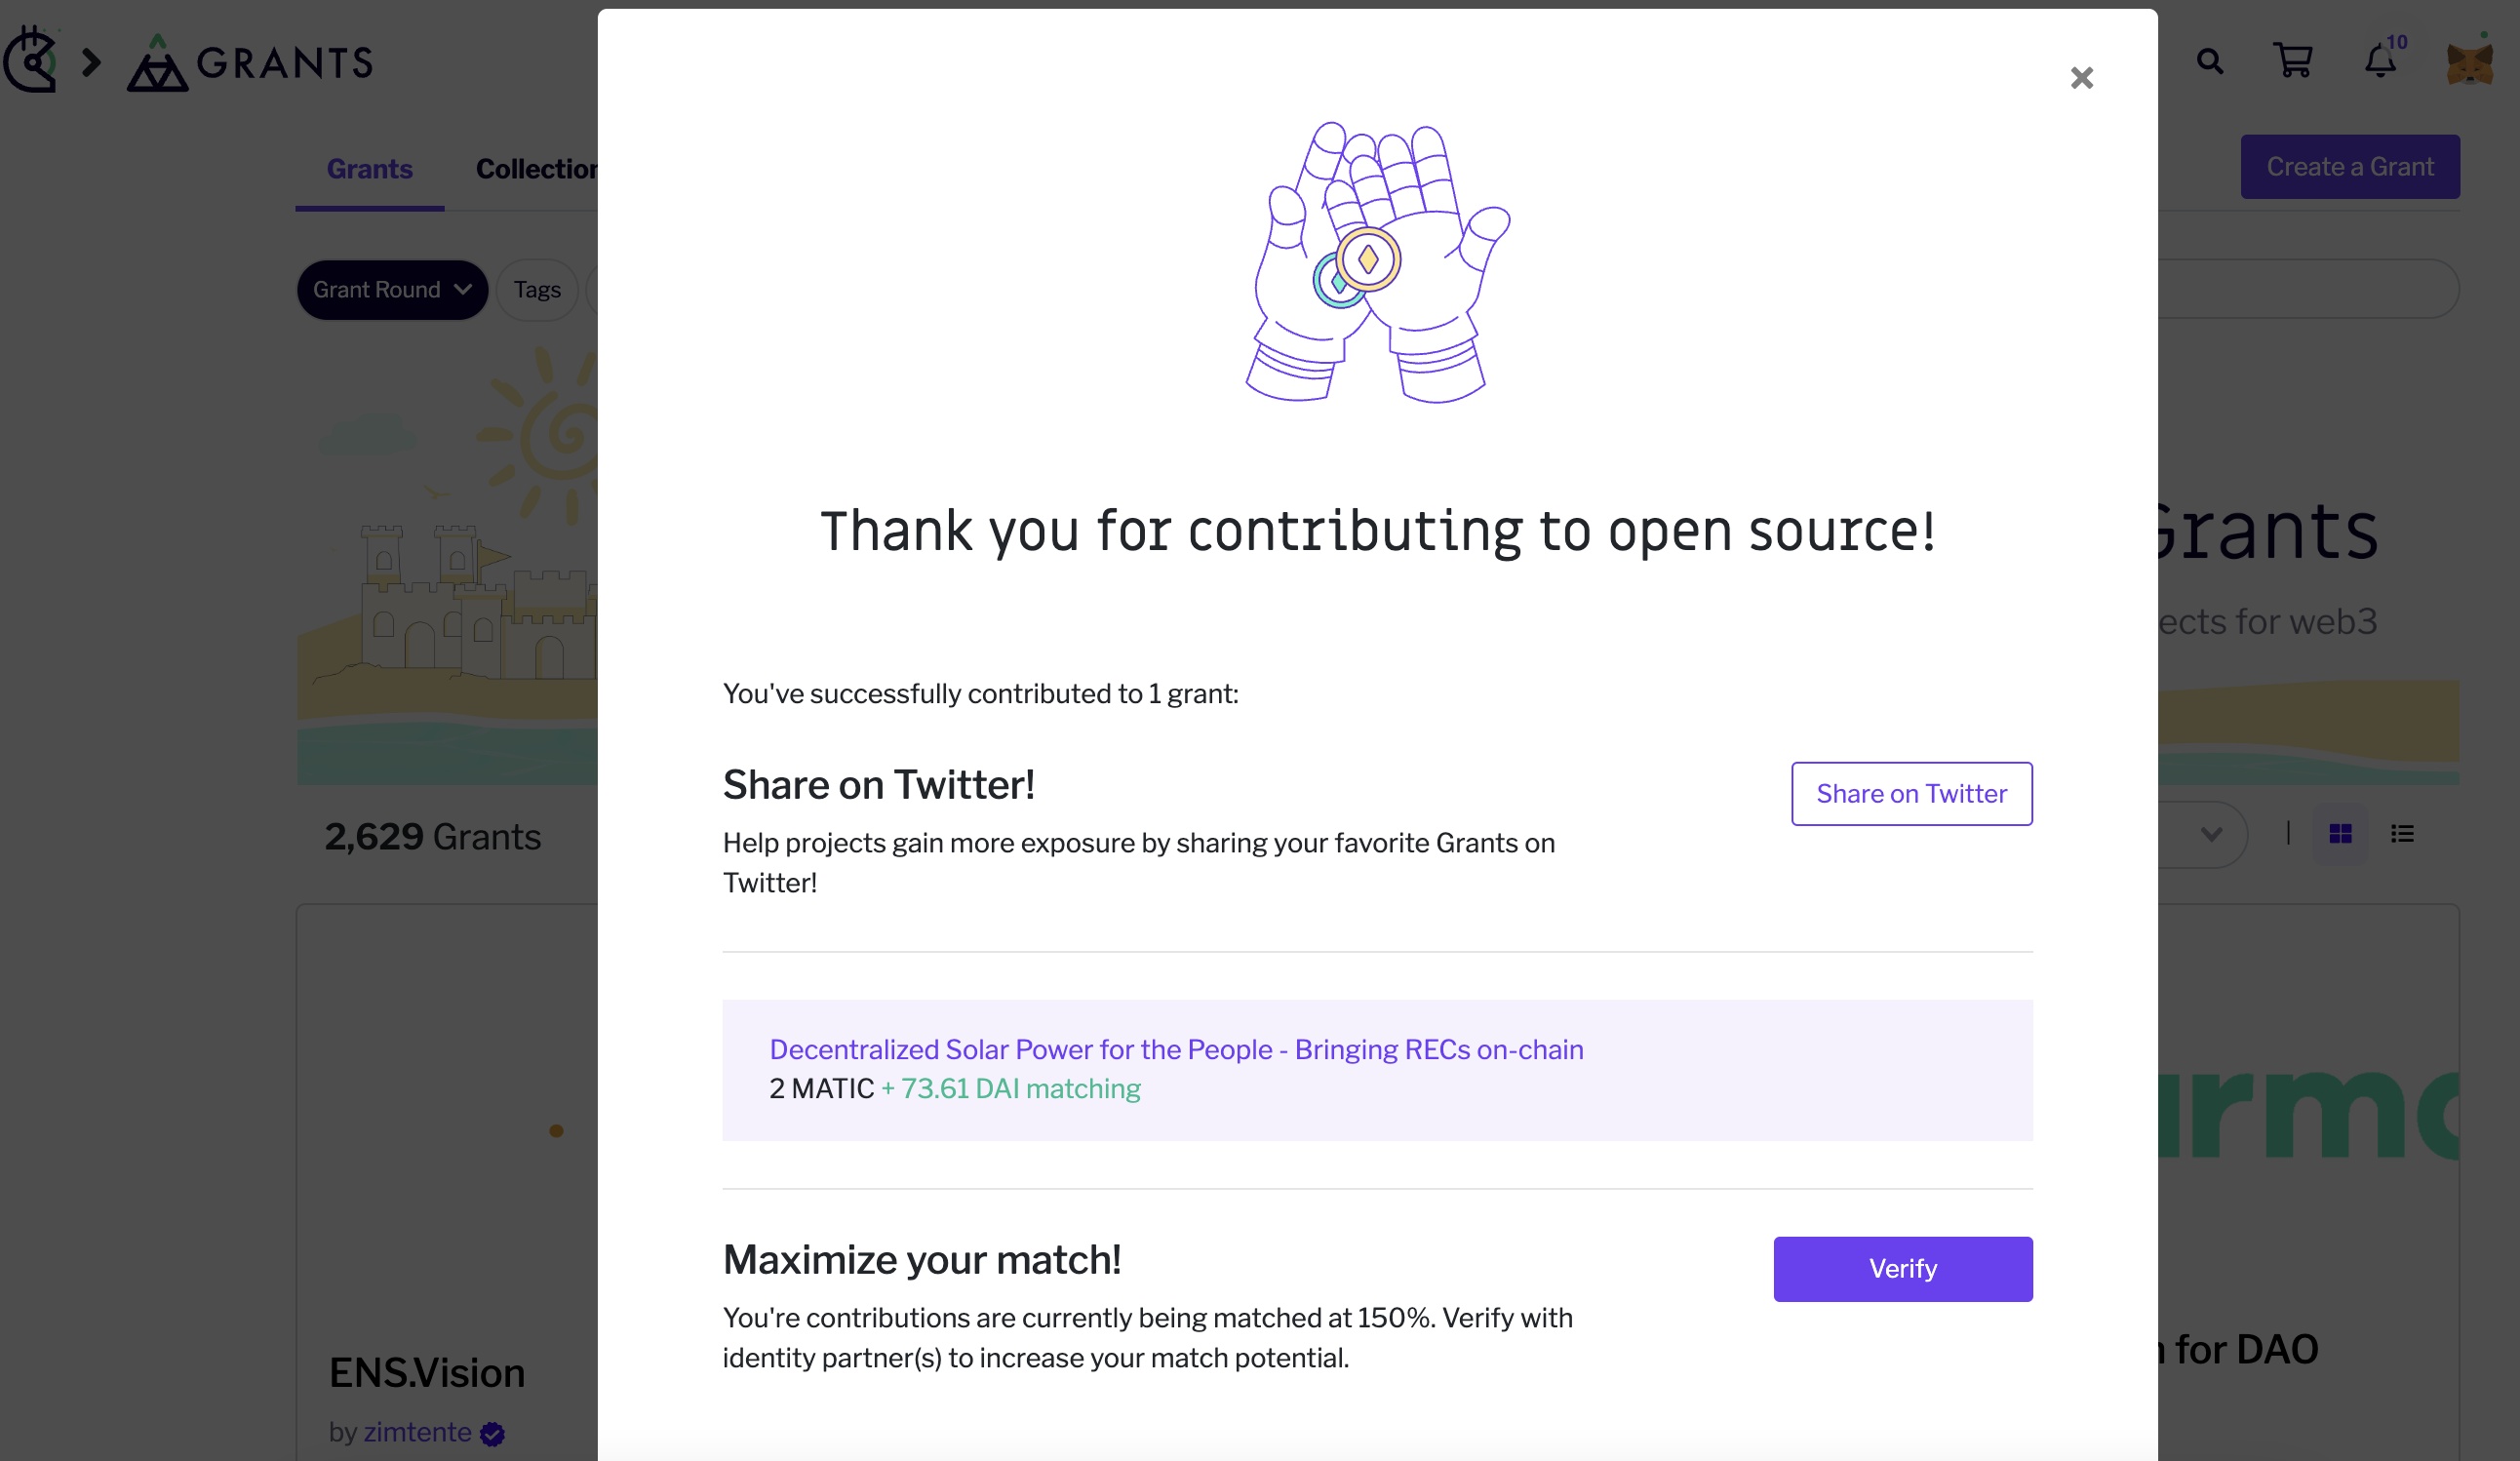 Your contribution went through! Now verify you're not manipulating the system by contributing from multiple accounts.